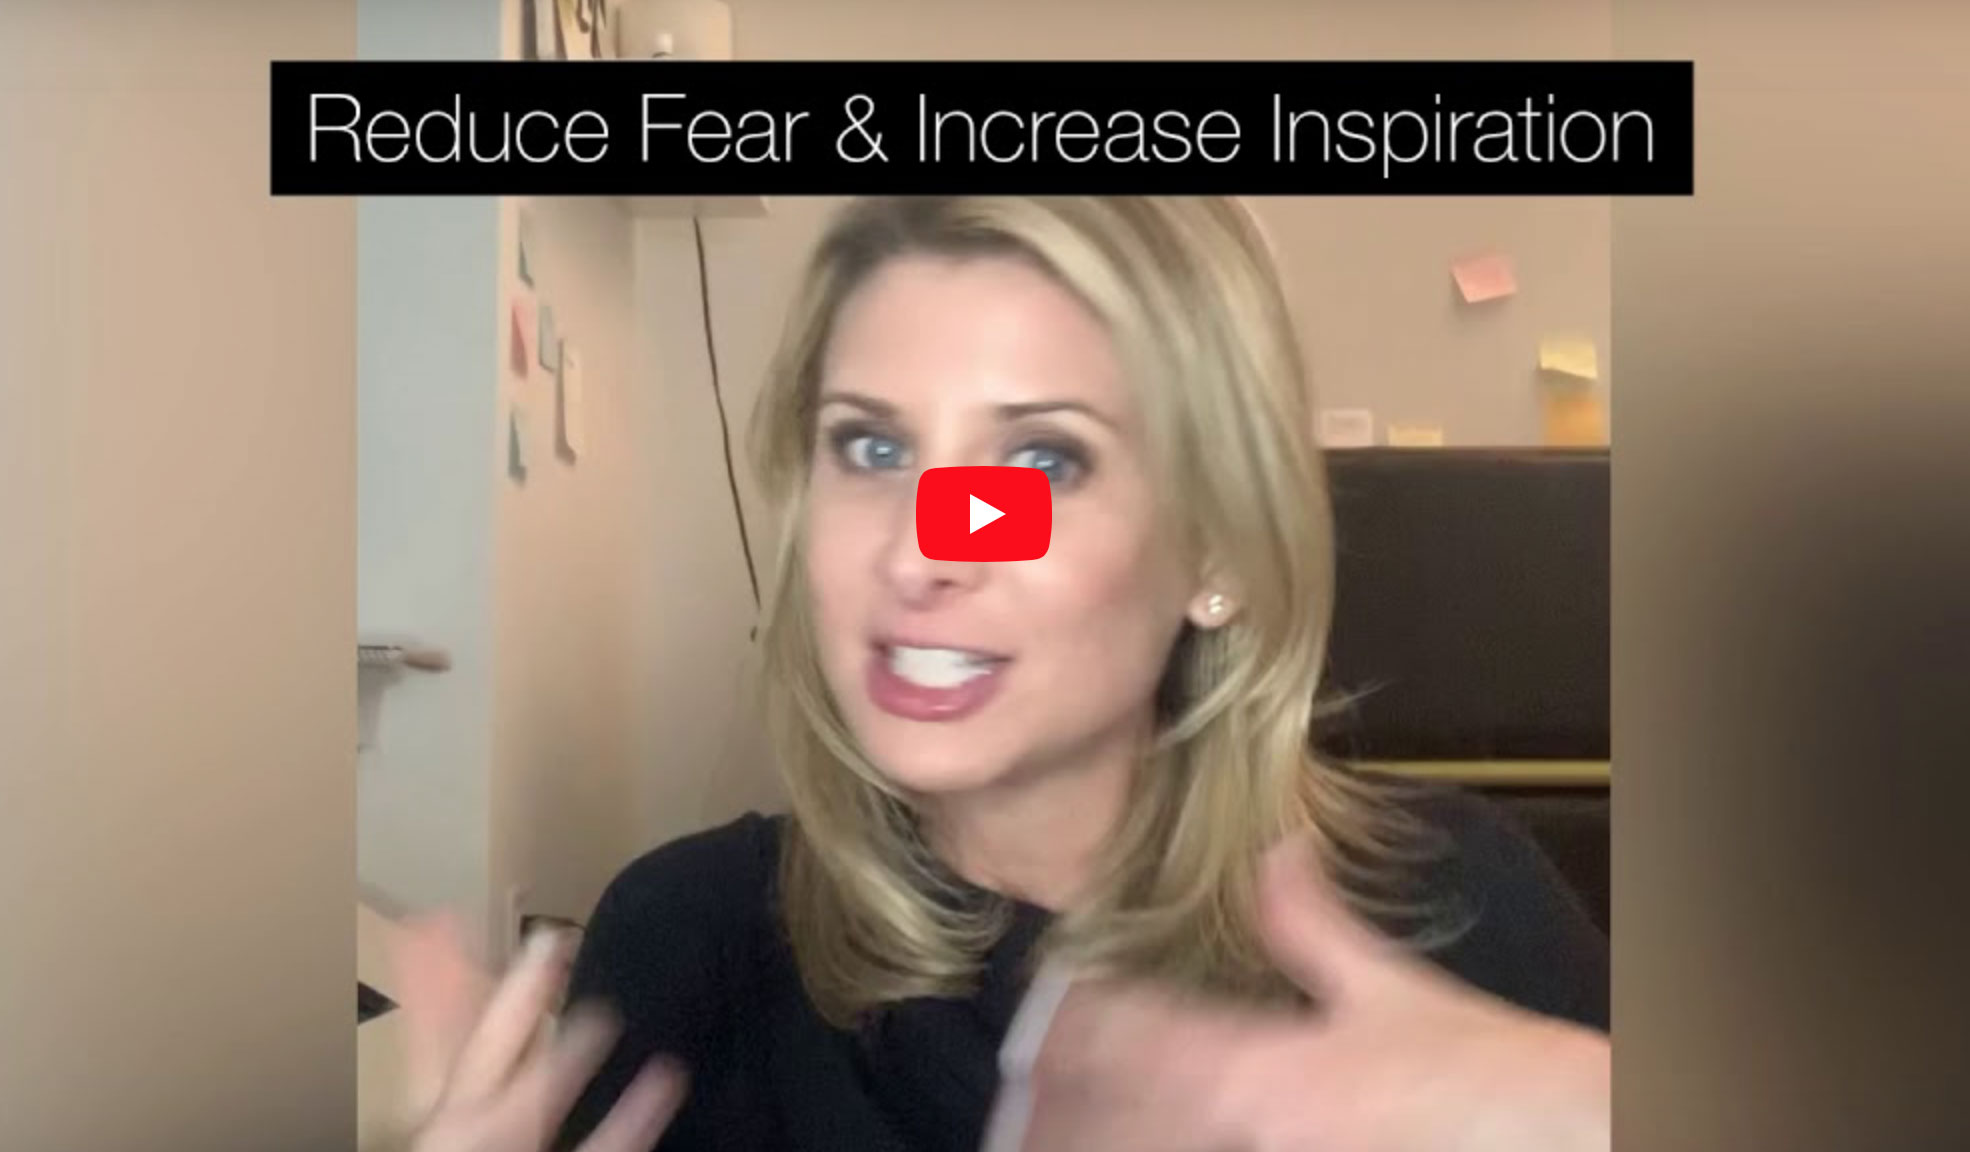 How to Reduce Fear & Increase Inspiration